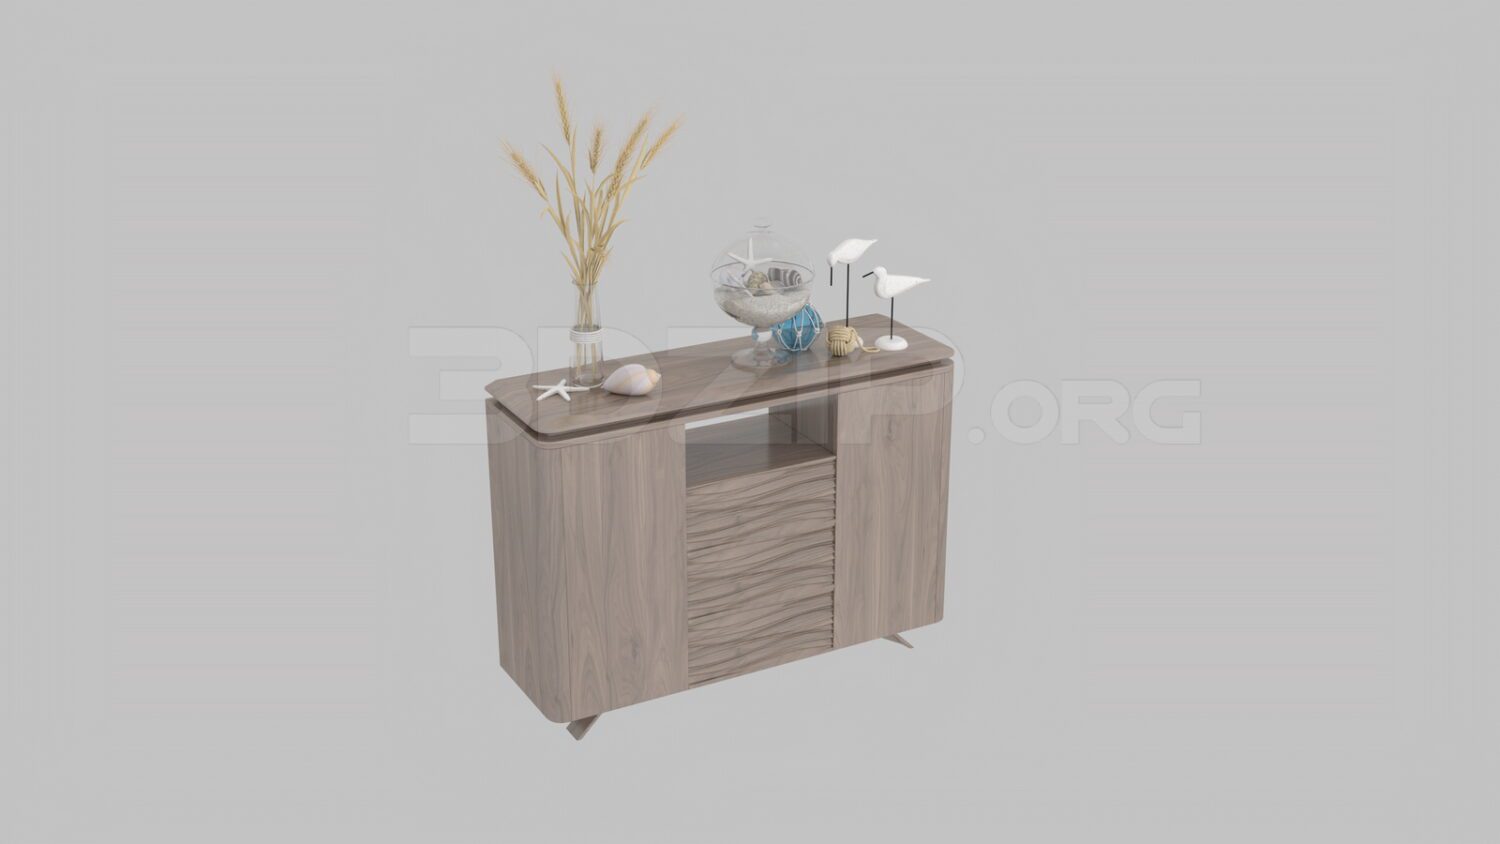 3131. Free 3D Display Cabinets Model Download